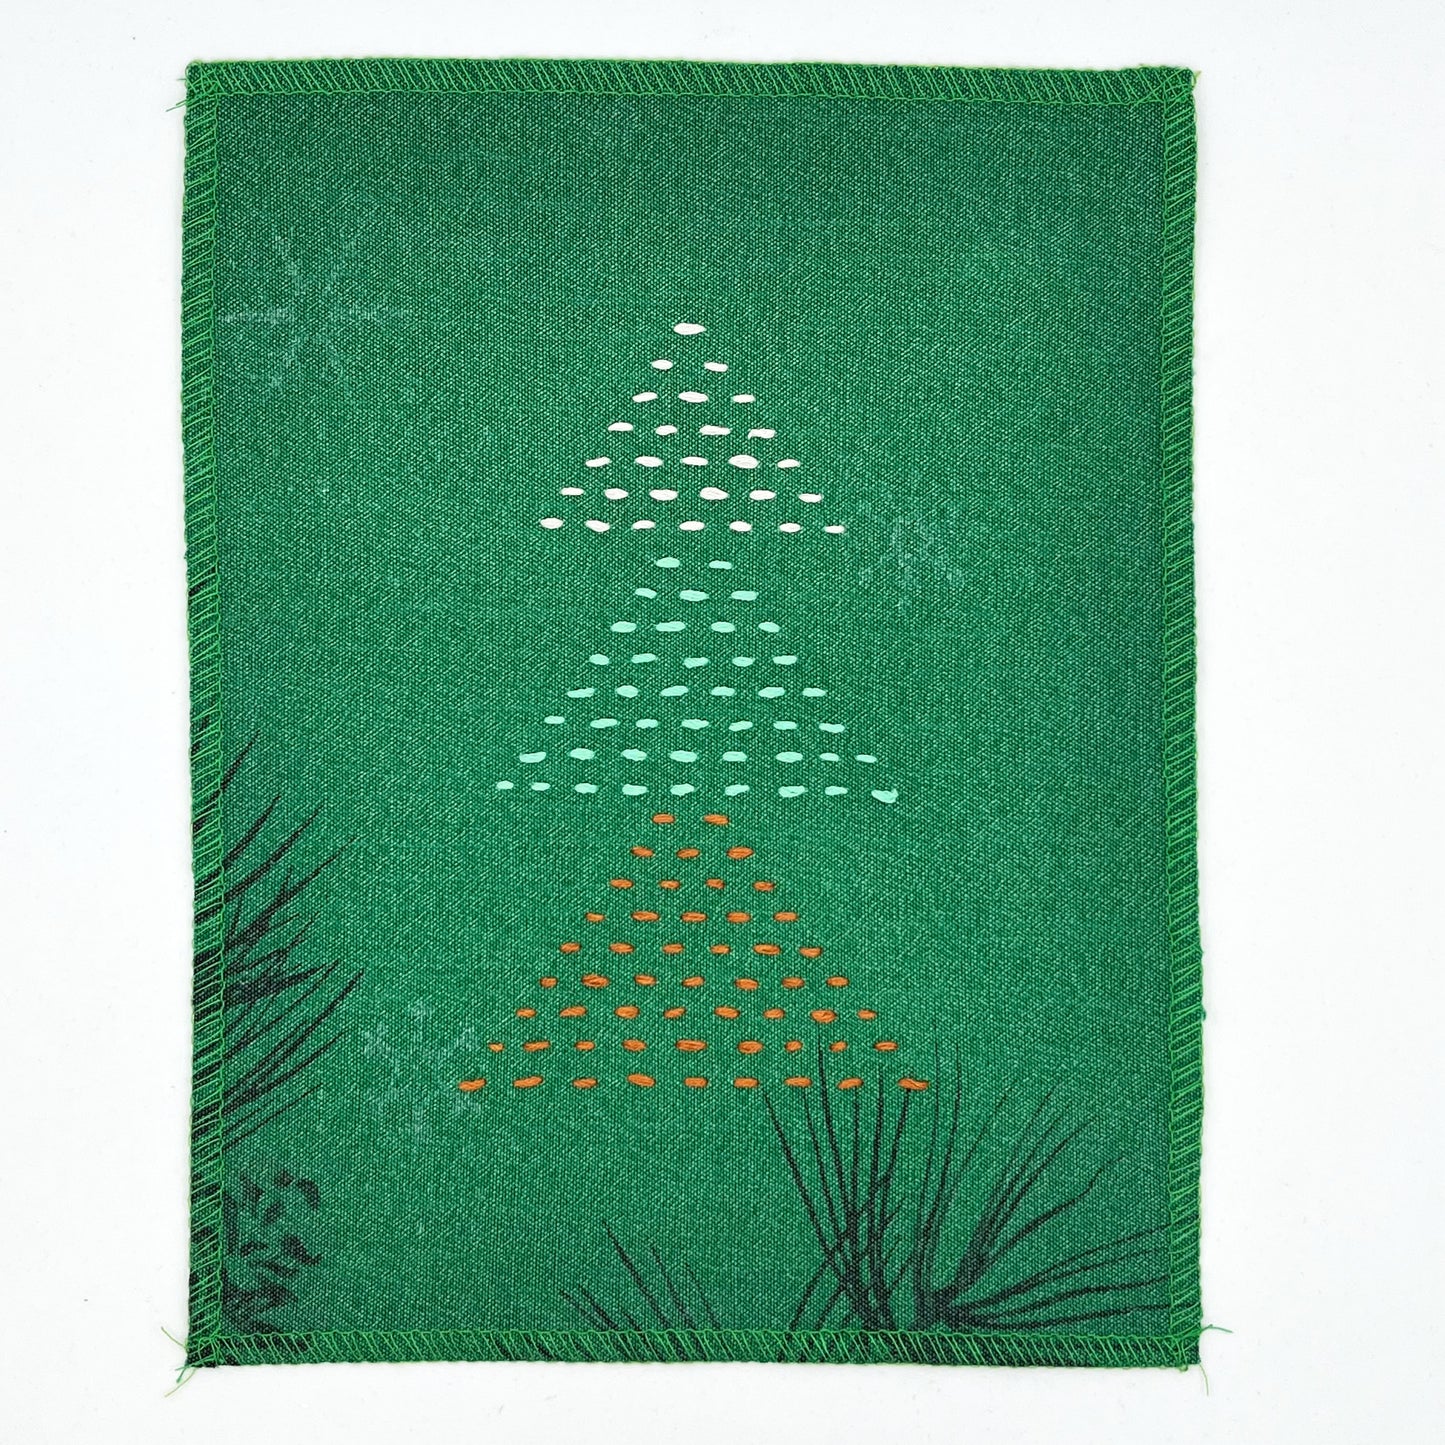 a fabric wall hanging made from bright green fabric with pine branches printed on it, and stitched over with Christmas trees made from three triangles, each triangle made from running stitches in red green and peach, on a white background